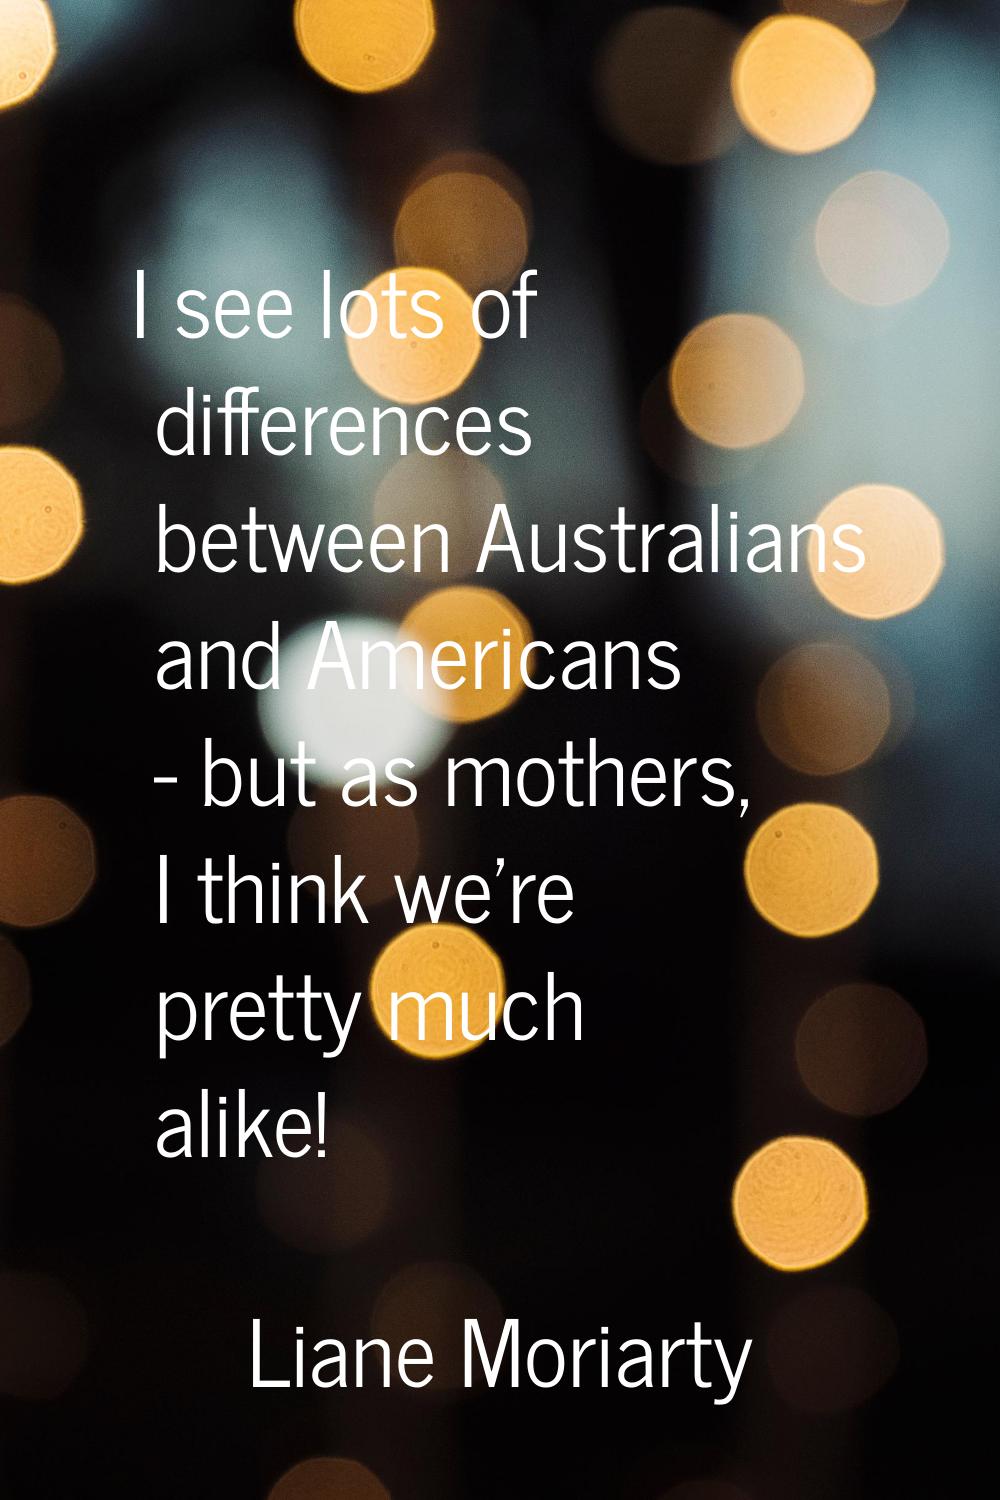 I see lots of differences between Australians and Americans - but as mothers, I think we're pretty 